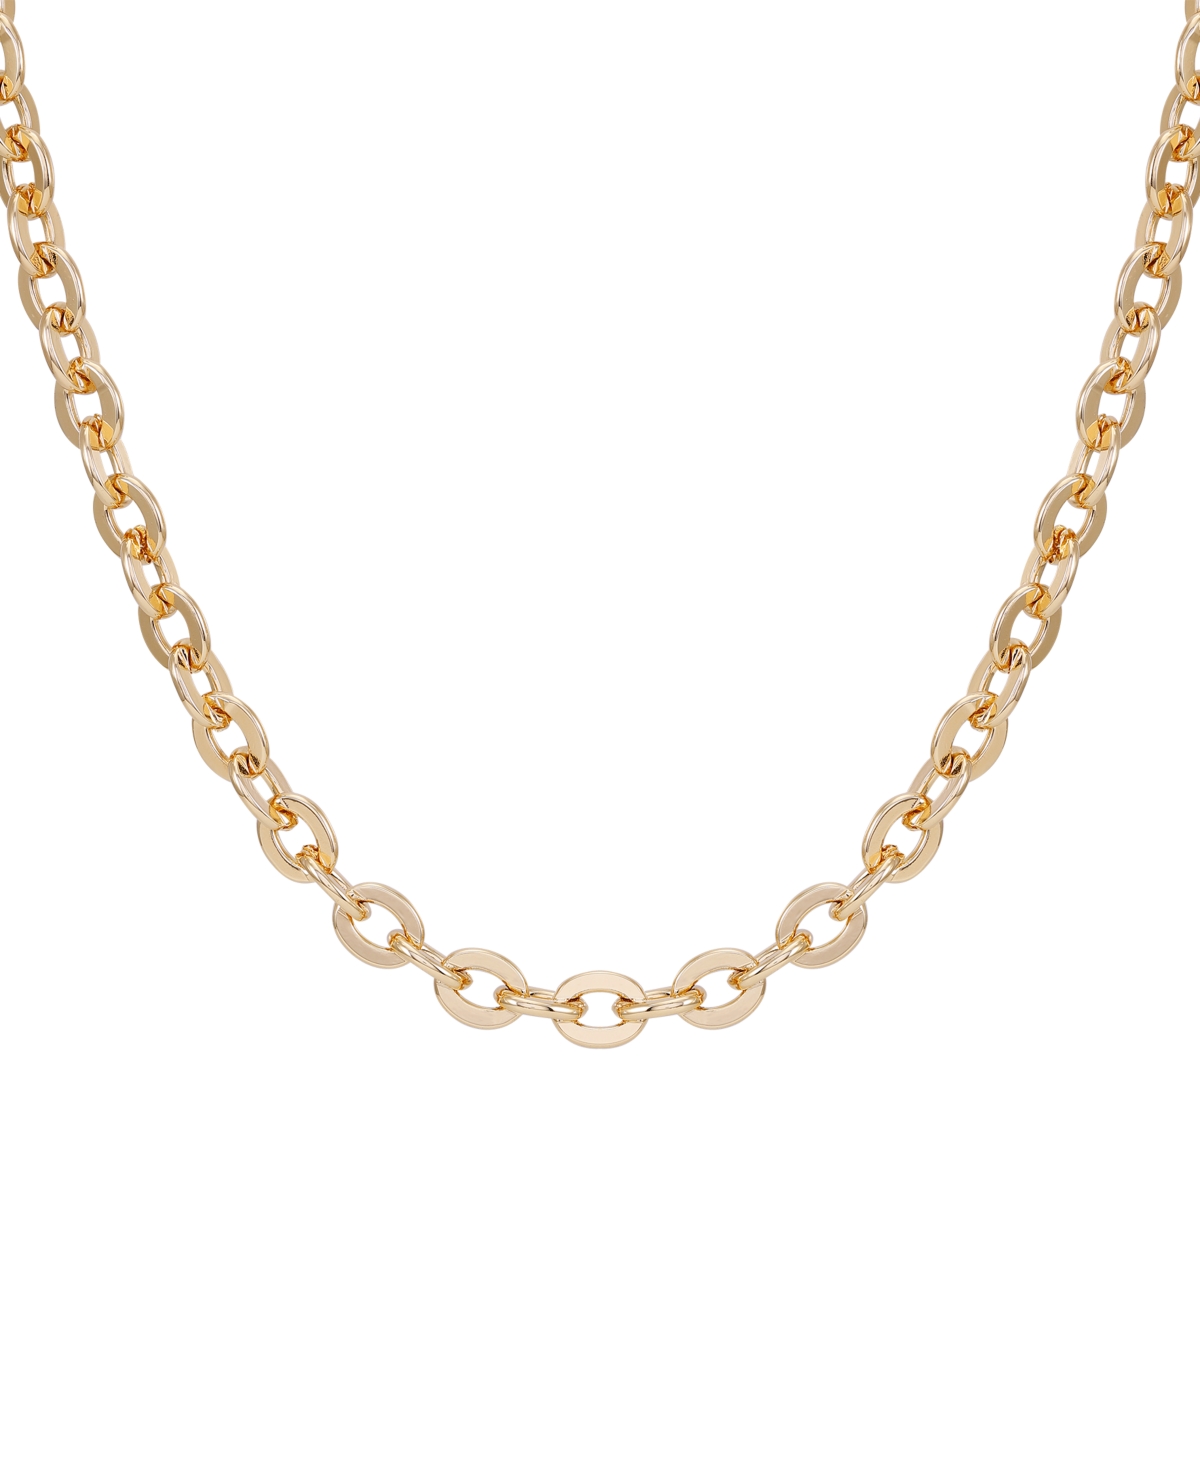 Shop Vince Camuto Gold-tone Chunky Chain Necklace, 18" + 2" Extender